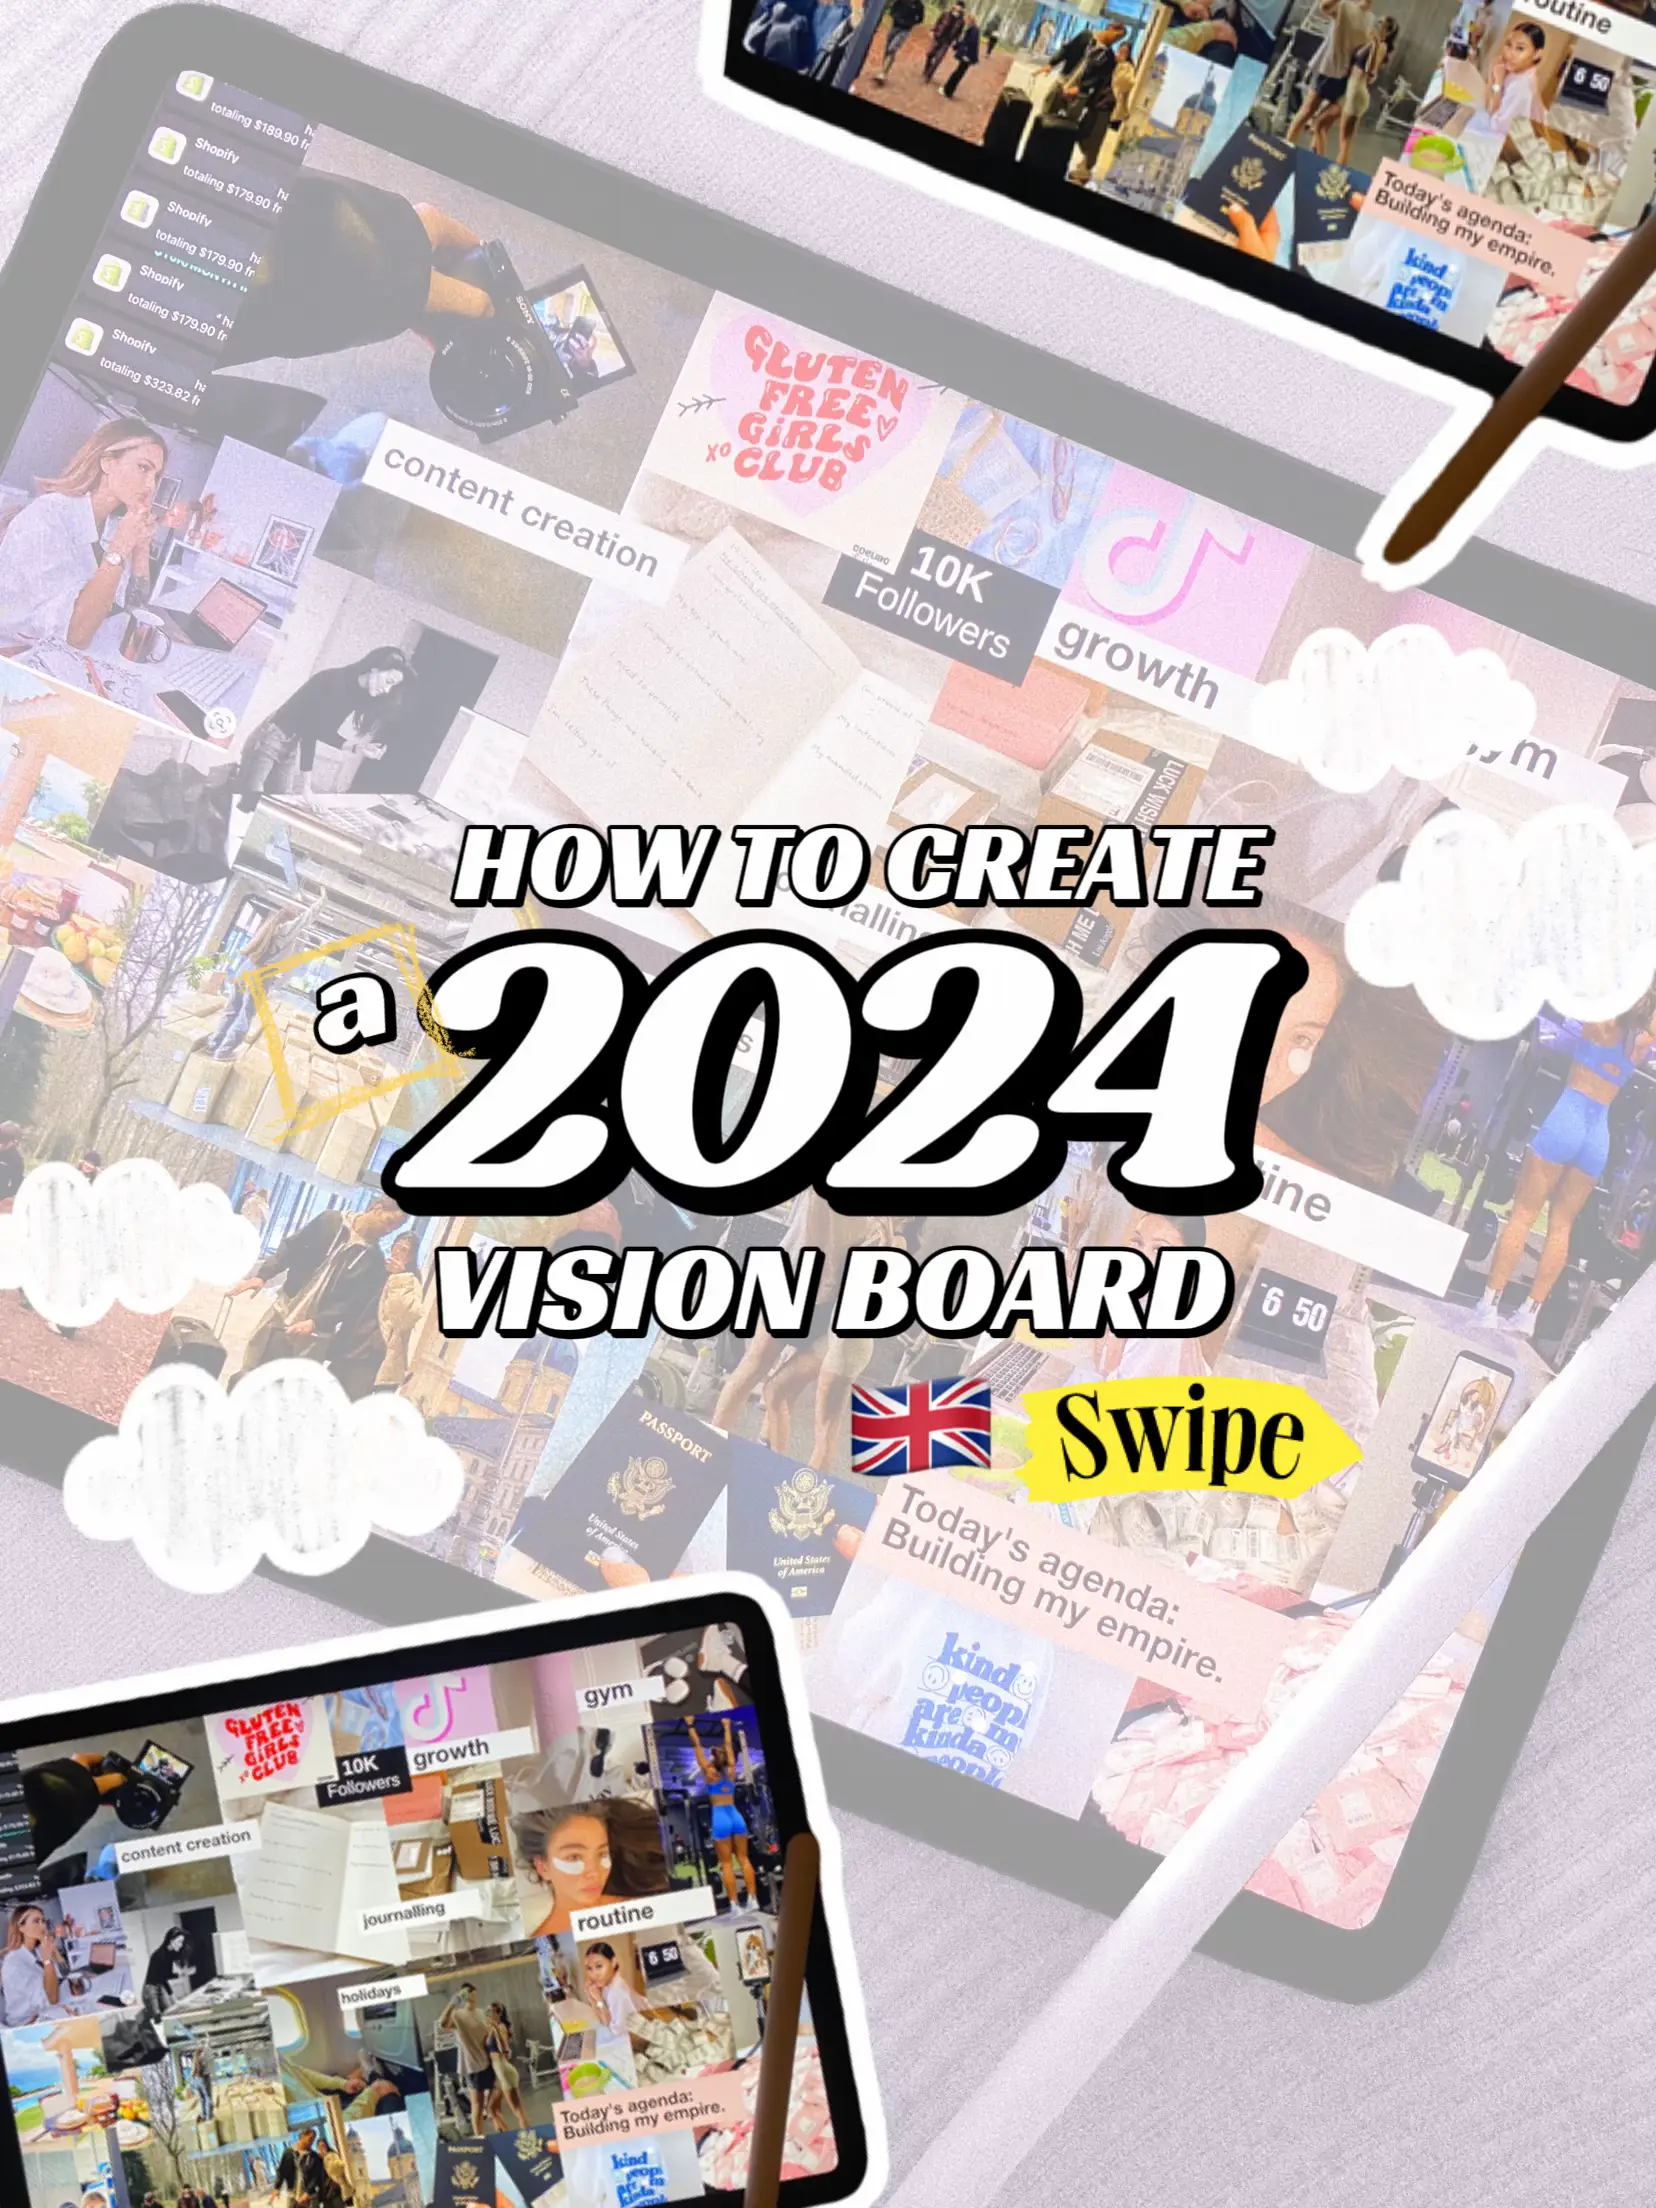 Vision Board Magazines: The Ultimate 2024 Vision Board Clip Art Book/+350  Elements, Pictures, Inspiring Images, Affirmations and Quotes Personal